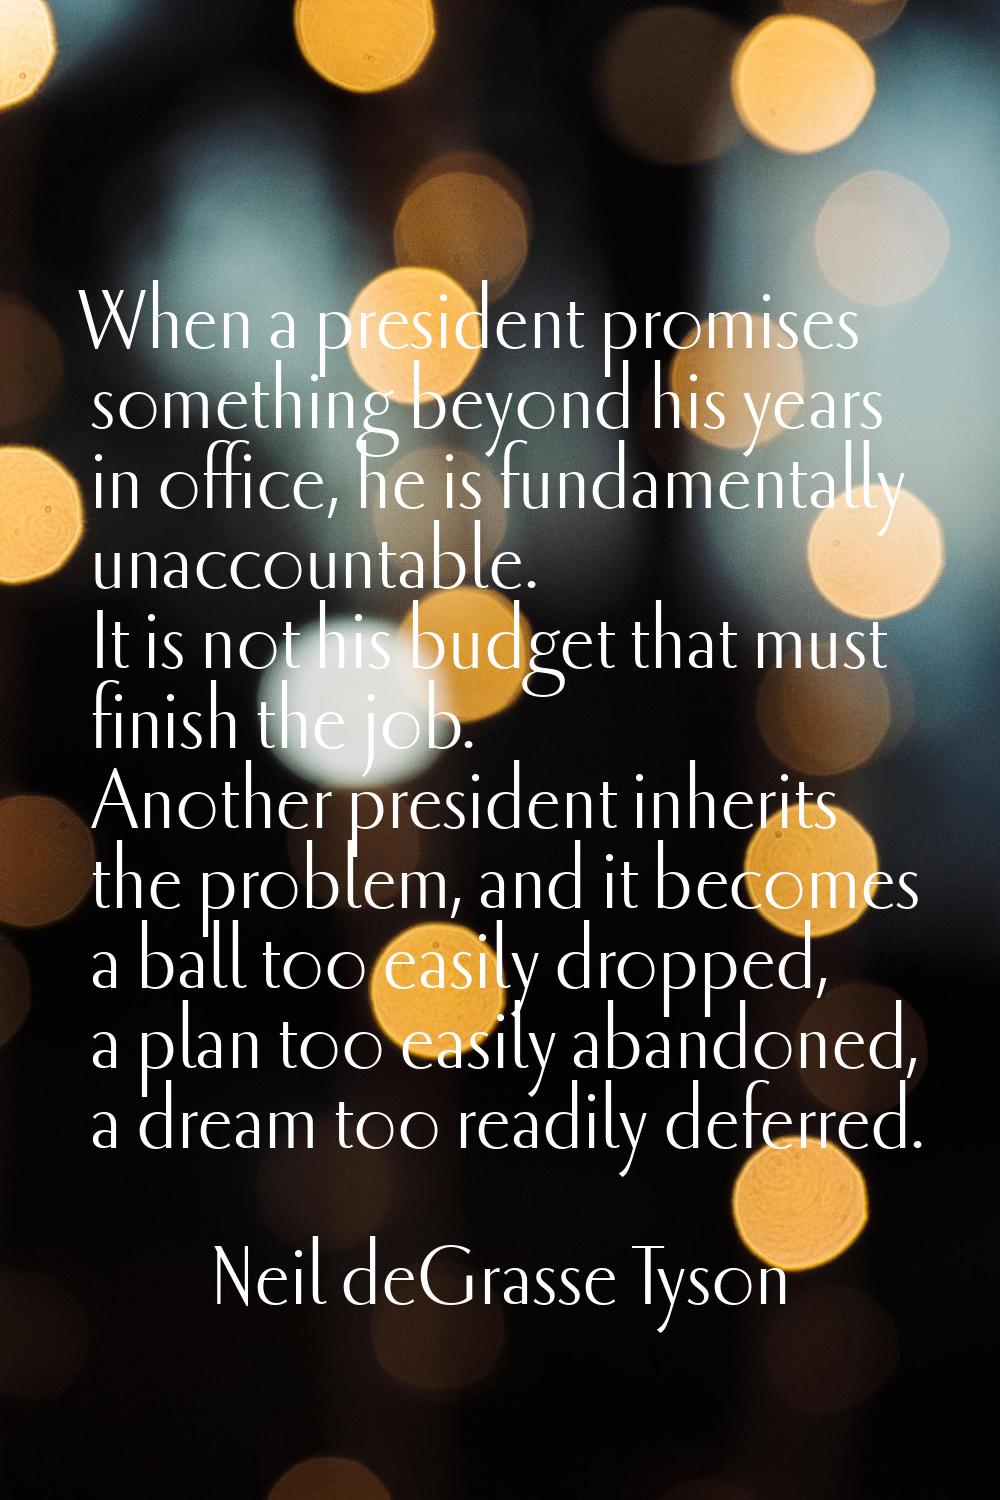 When a president promises something beyond his years in office, he is fundamentally unaccountable. 